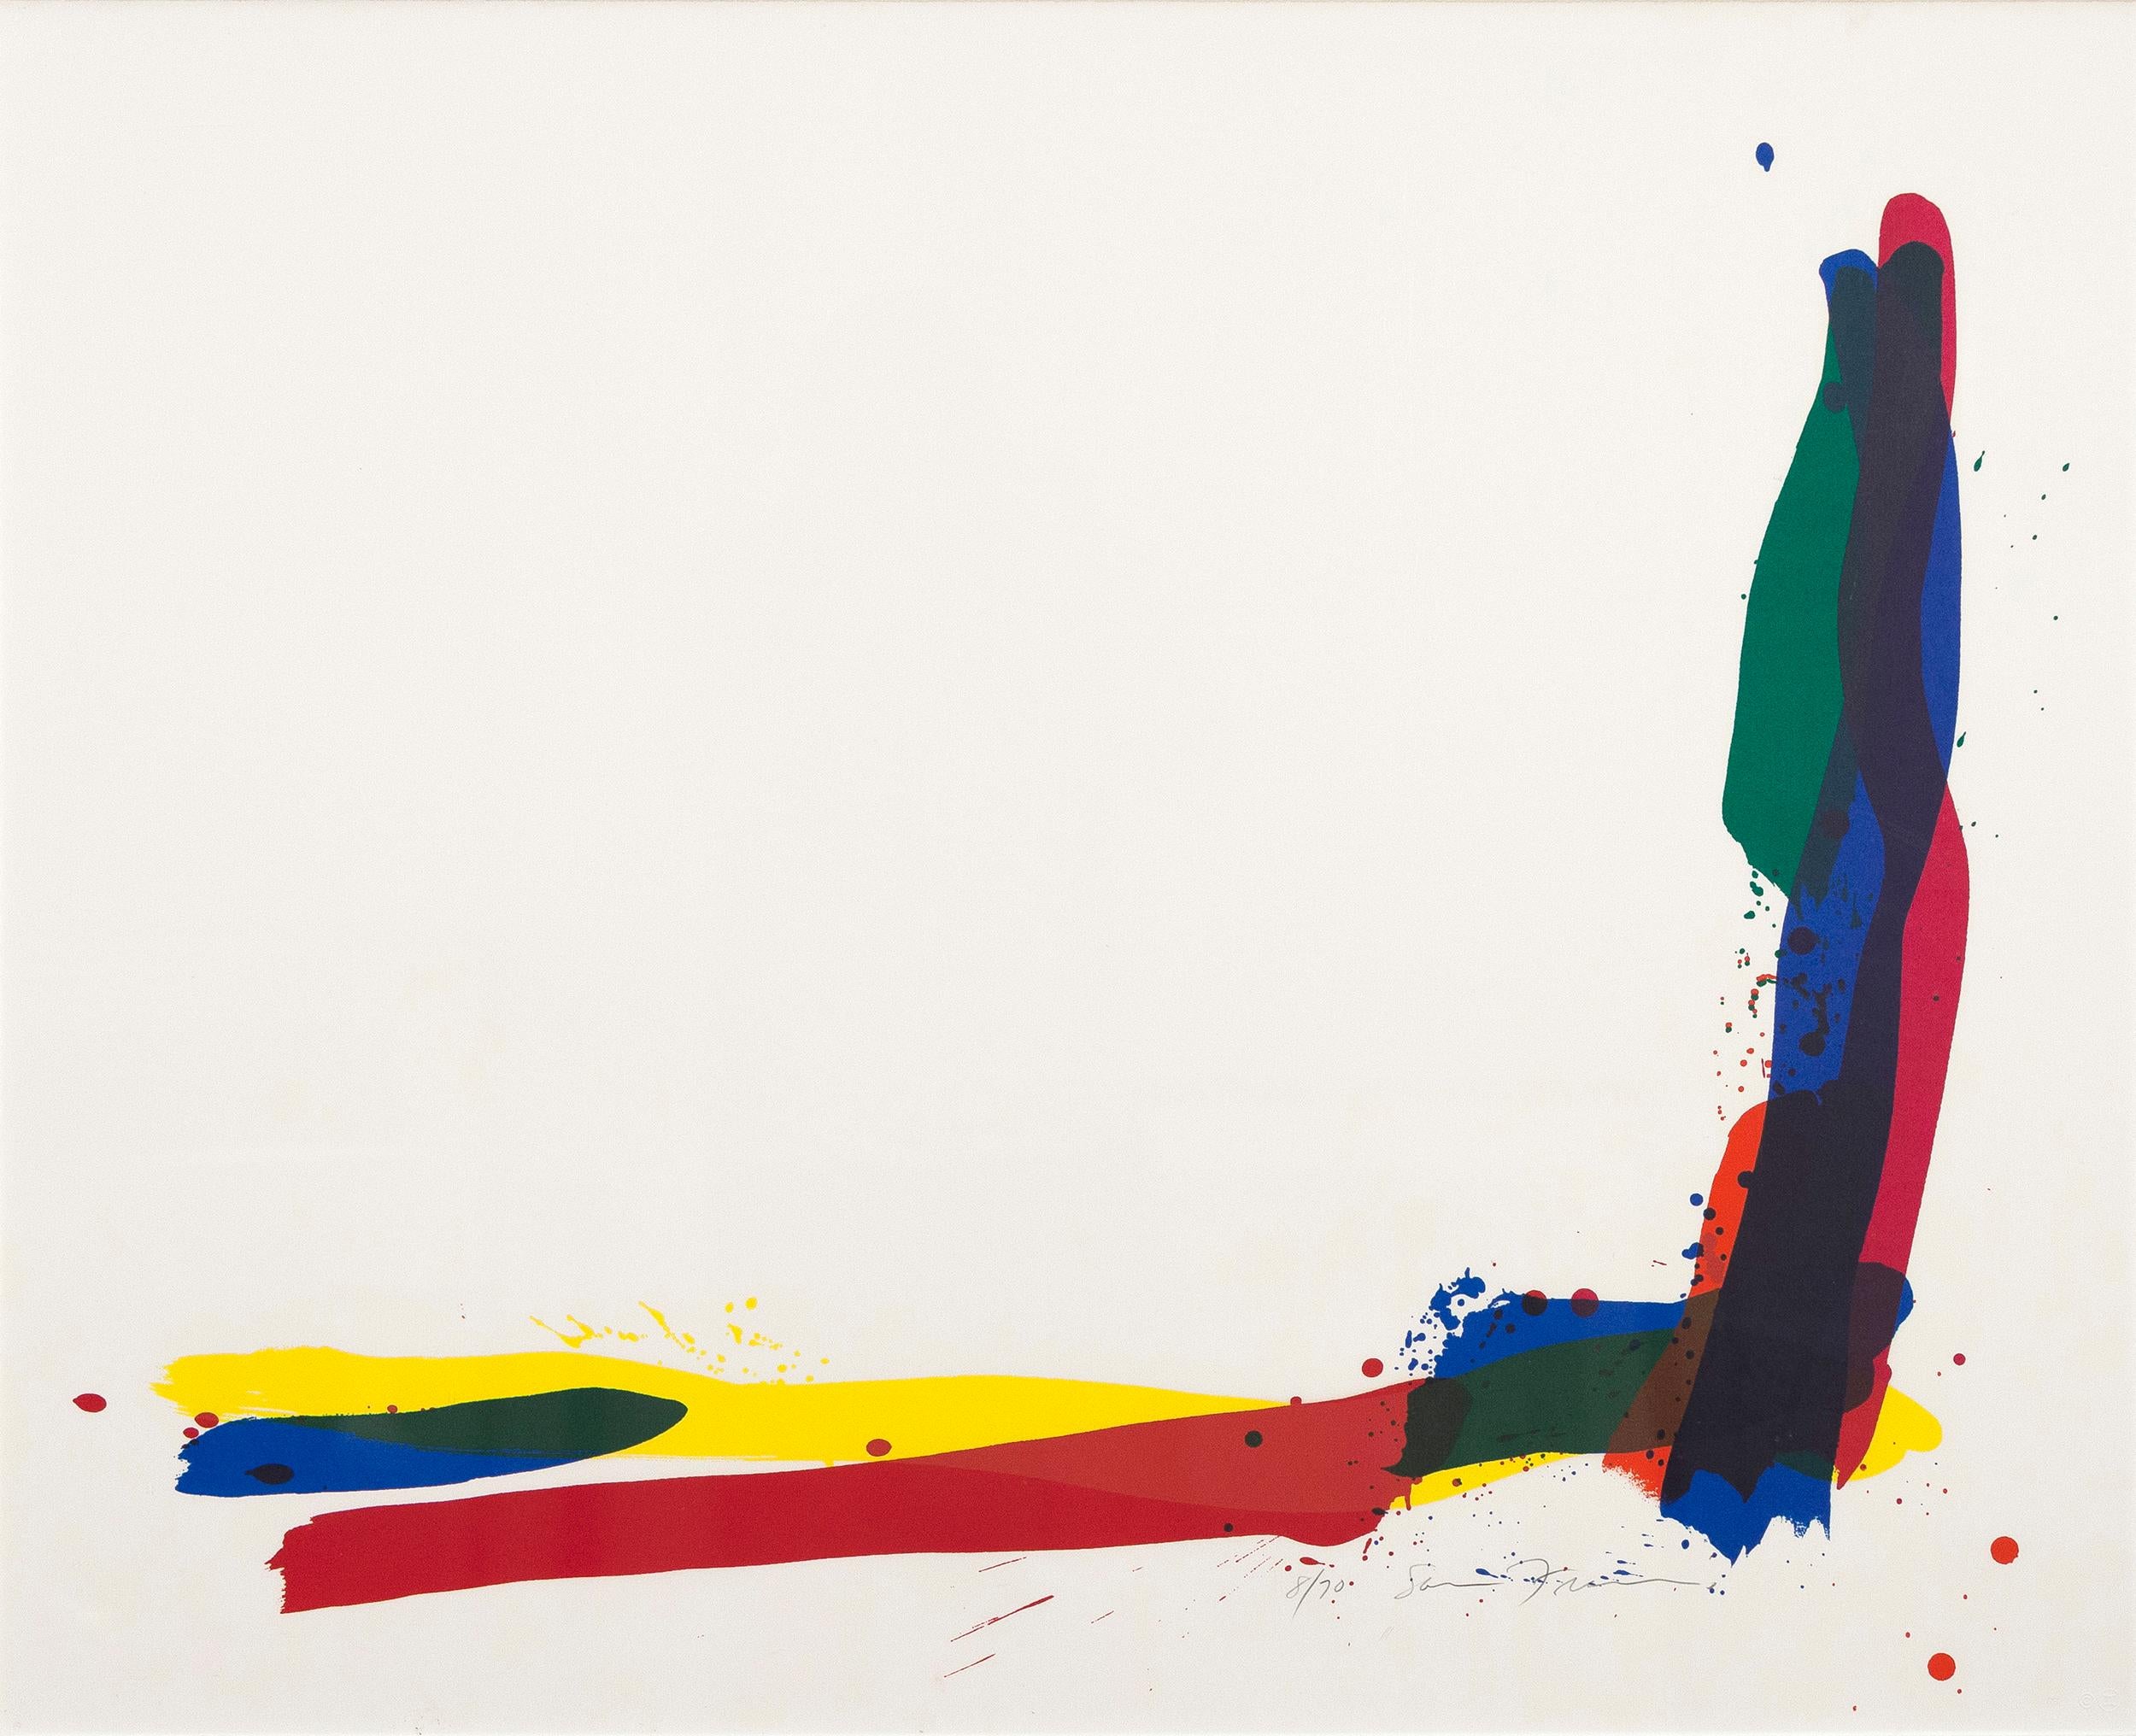 A preeminent figure in 20th century abstraction, Sam Francis (1923-1994) is renowned for his dynamic and colorful works.

After his military service, Francis returned to California and received a Masters of Arts from Cal Berkeley in 1950. Taking